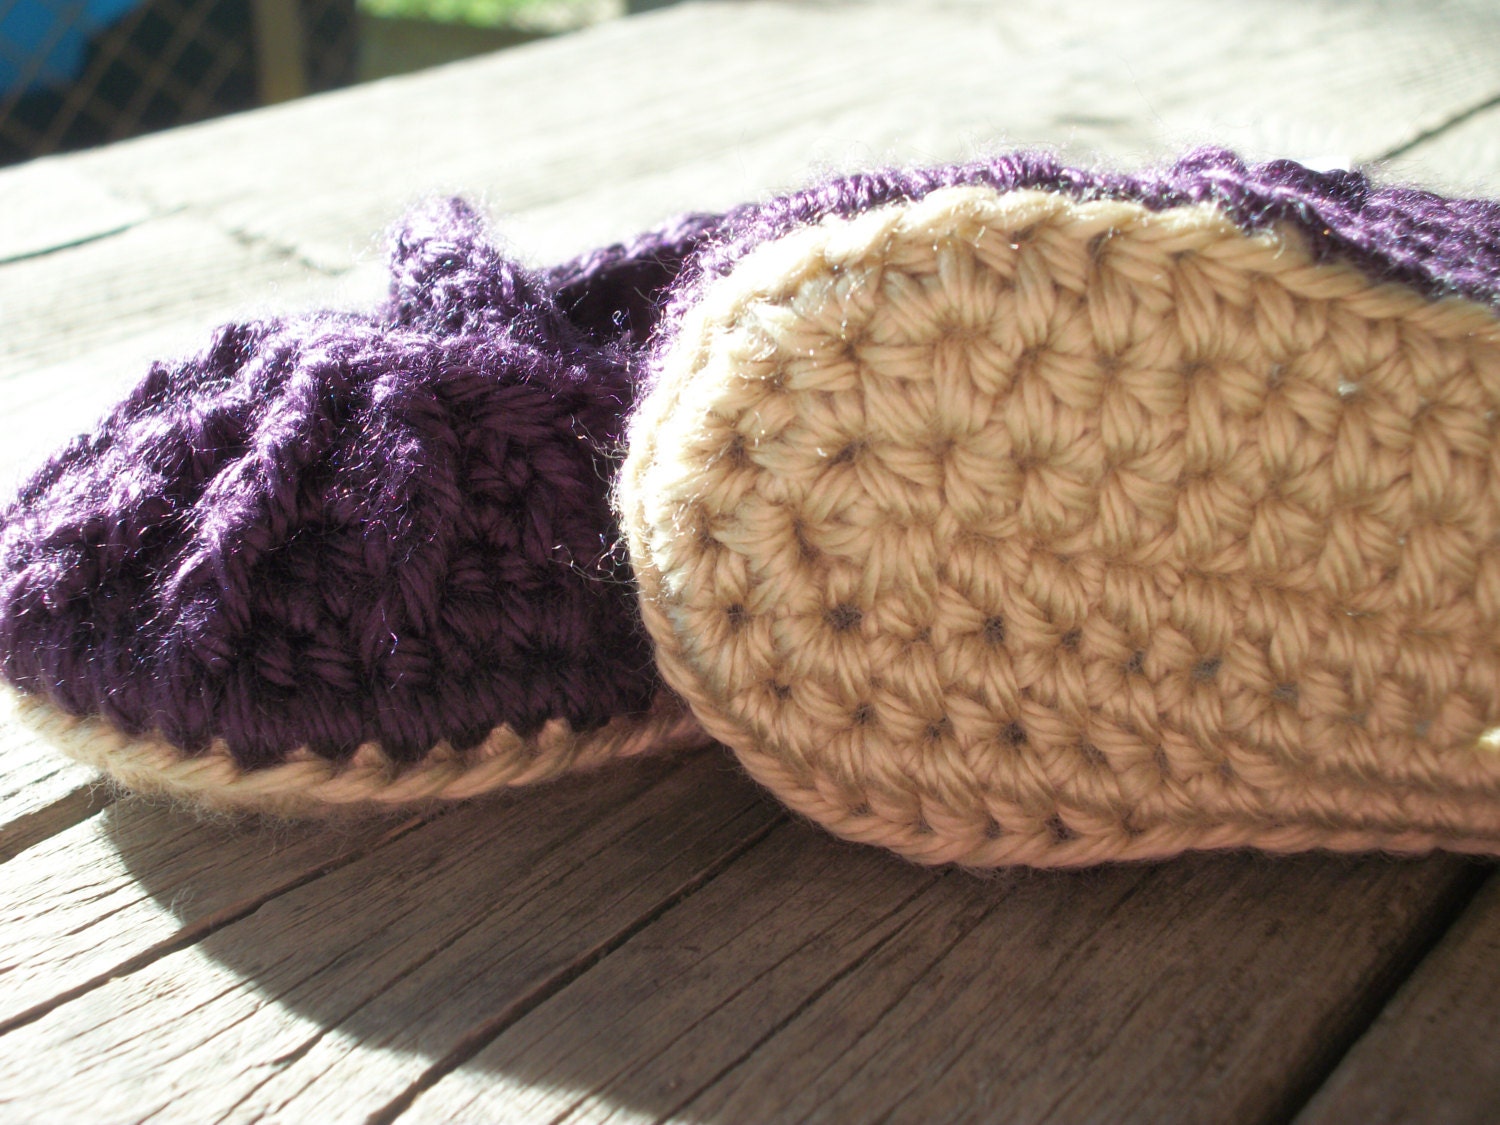 Crochet Mary Jane Baby Booties/ 0-6 Months